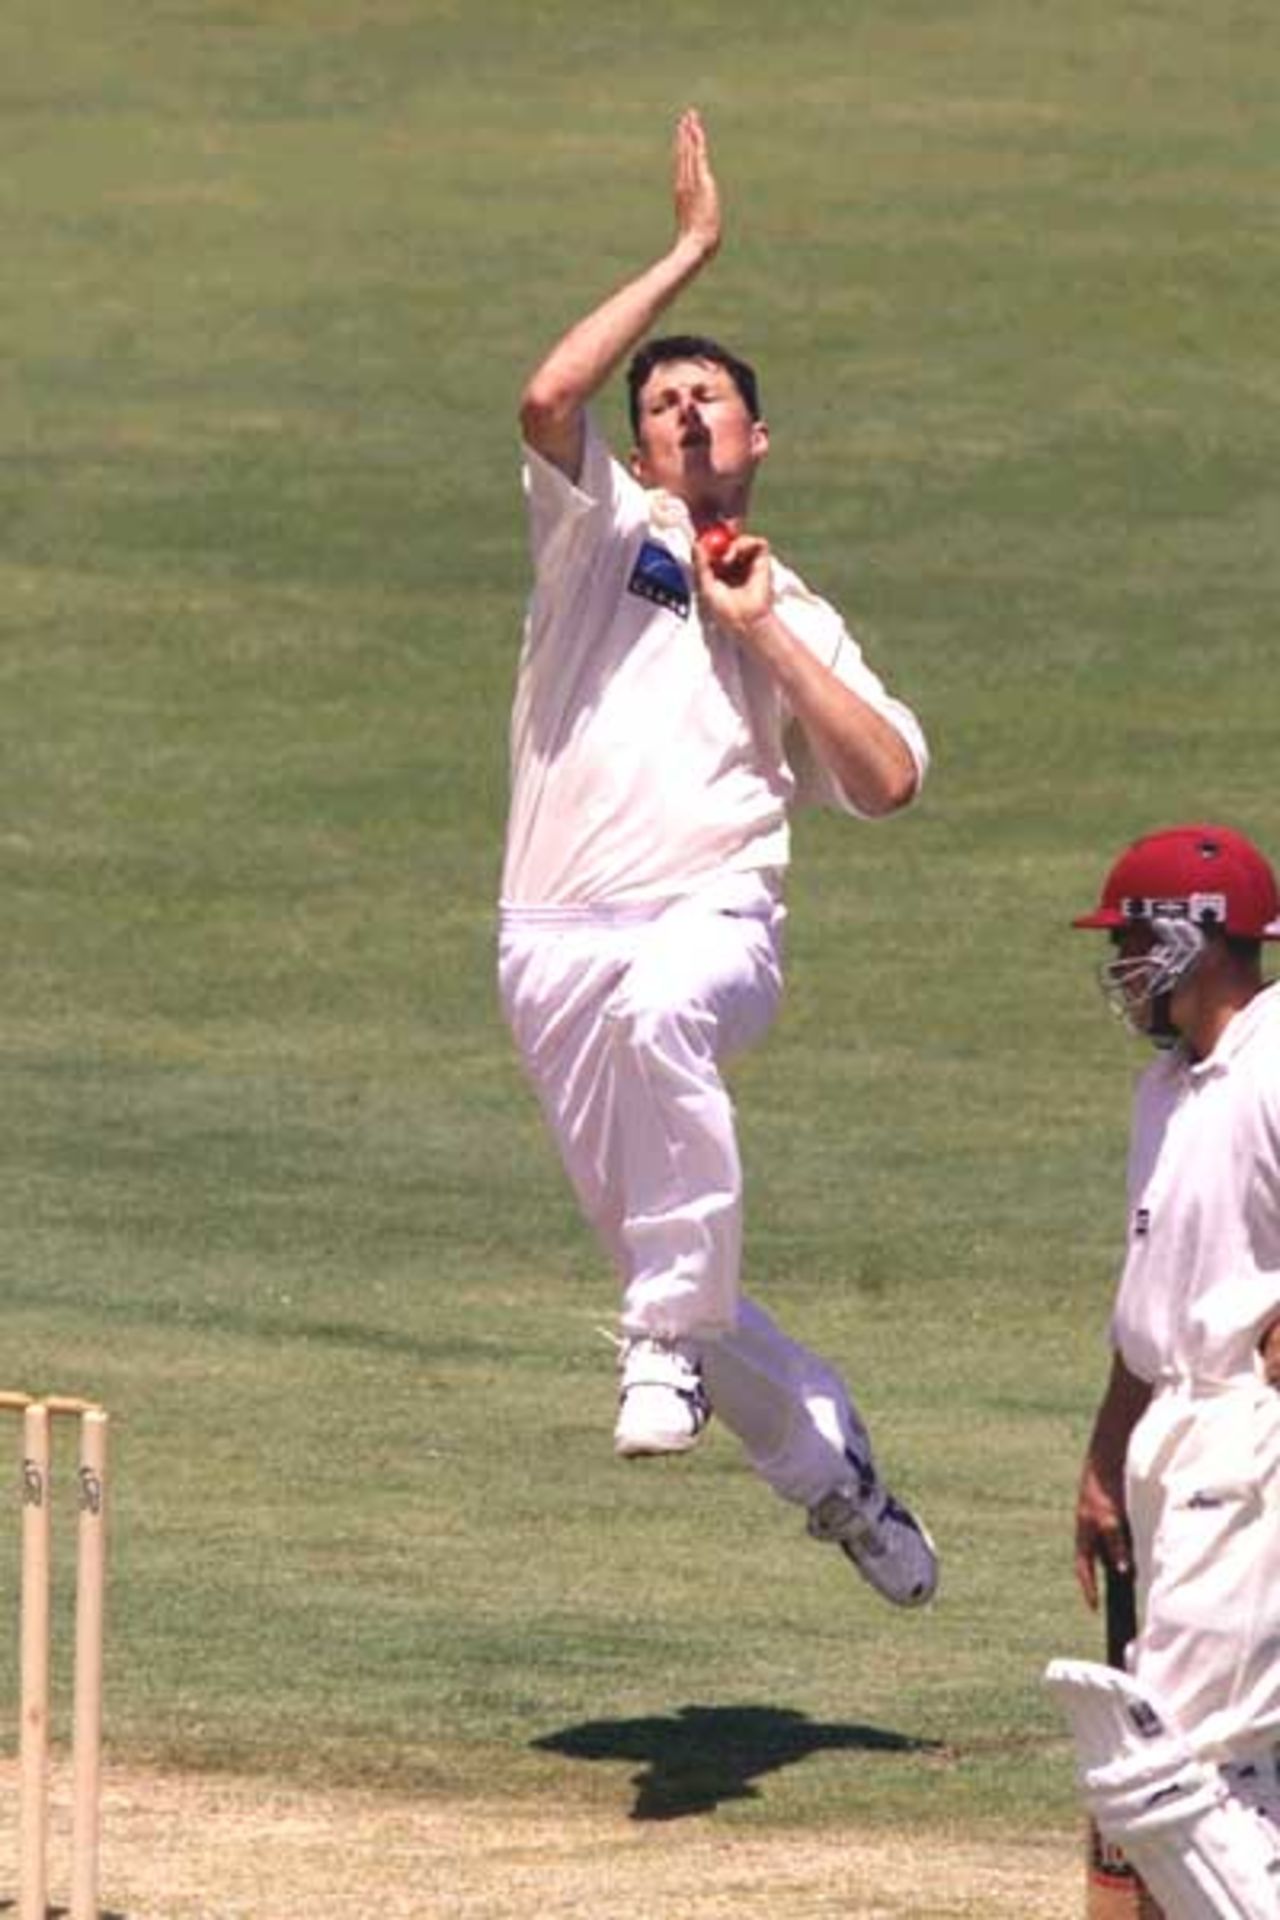 18 Oct 2001: Shayne O'Connor of New Zealand in action during the match between New Zealand and the Queensland XI played at the Allan Border Field, Brisbane, Australia.